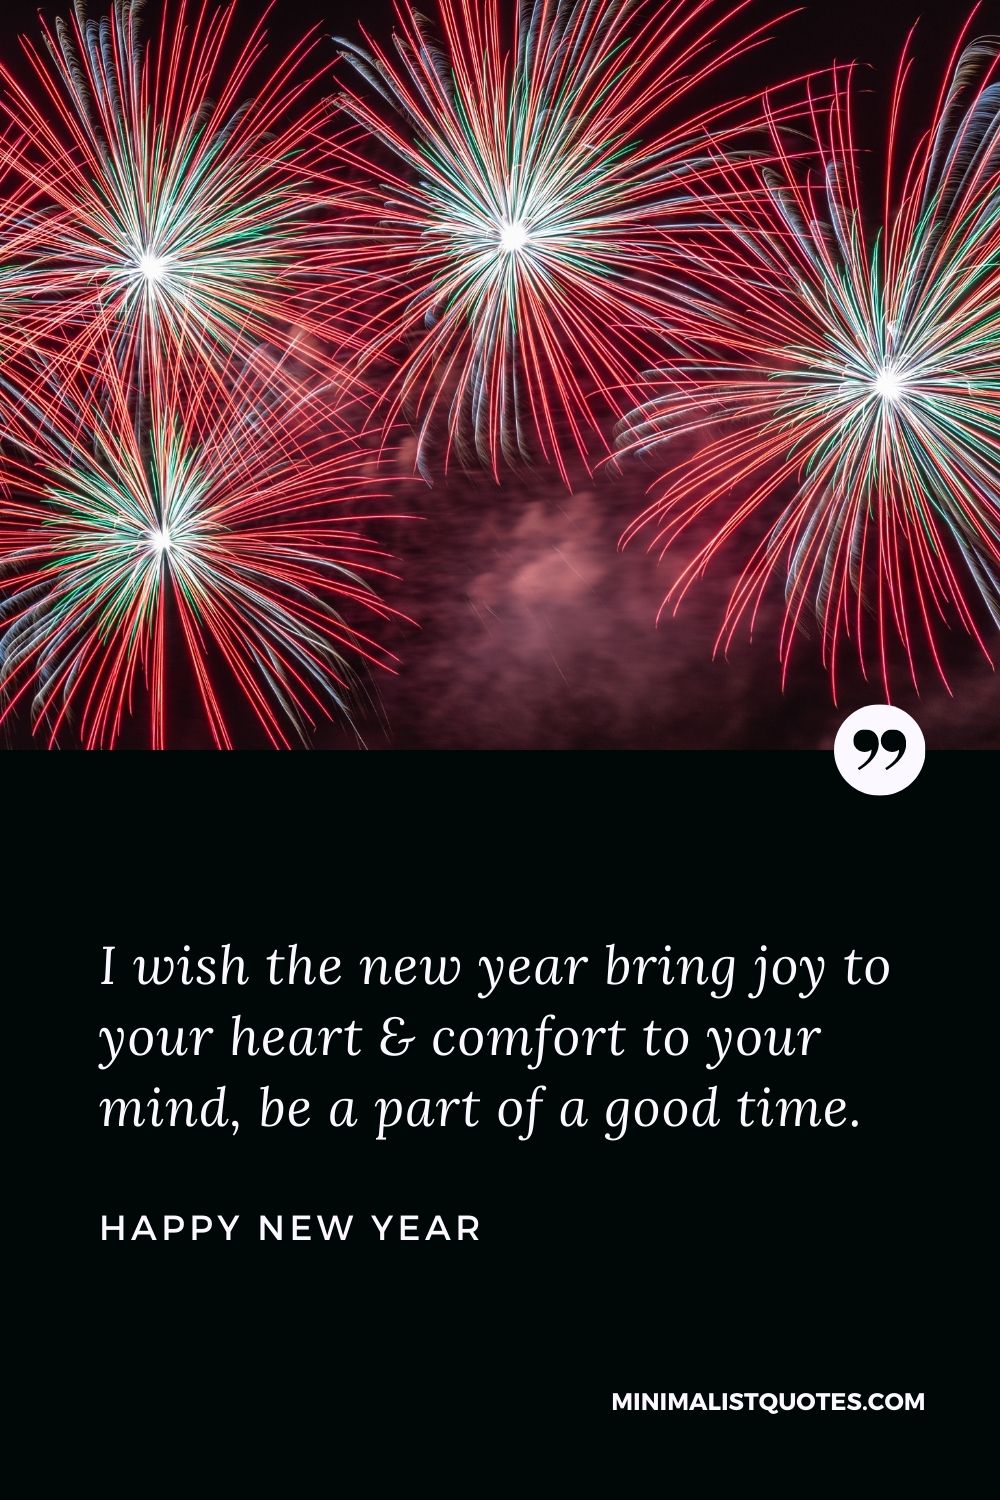 New Year Wish - I wish the new year bring joy to your heart & comfort to your mind, be a part of a good time.